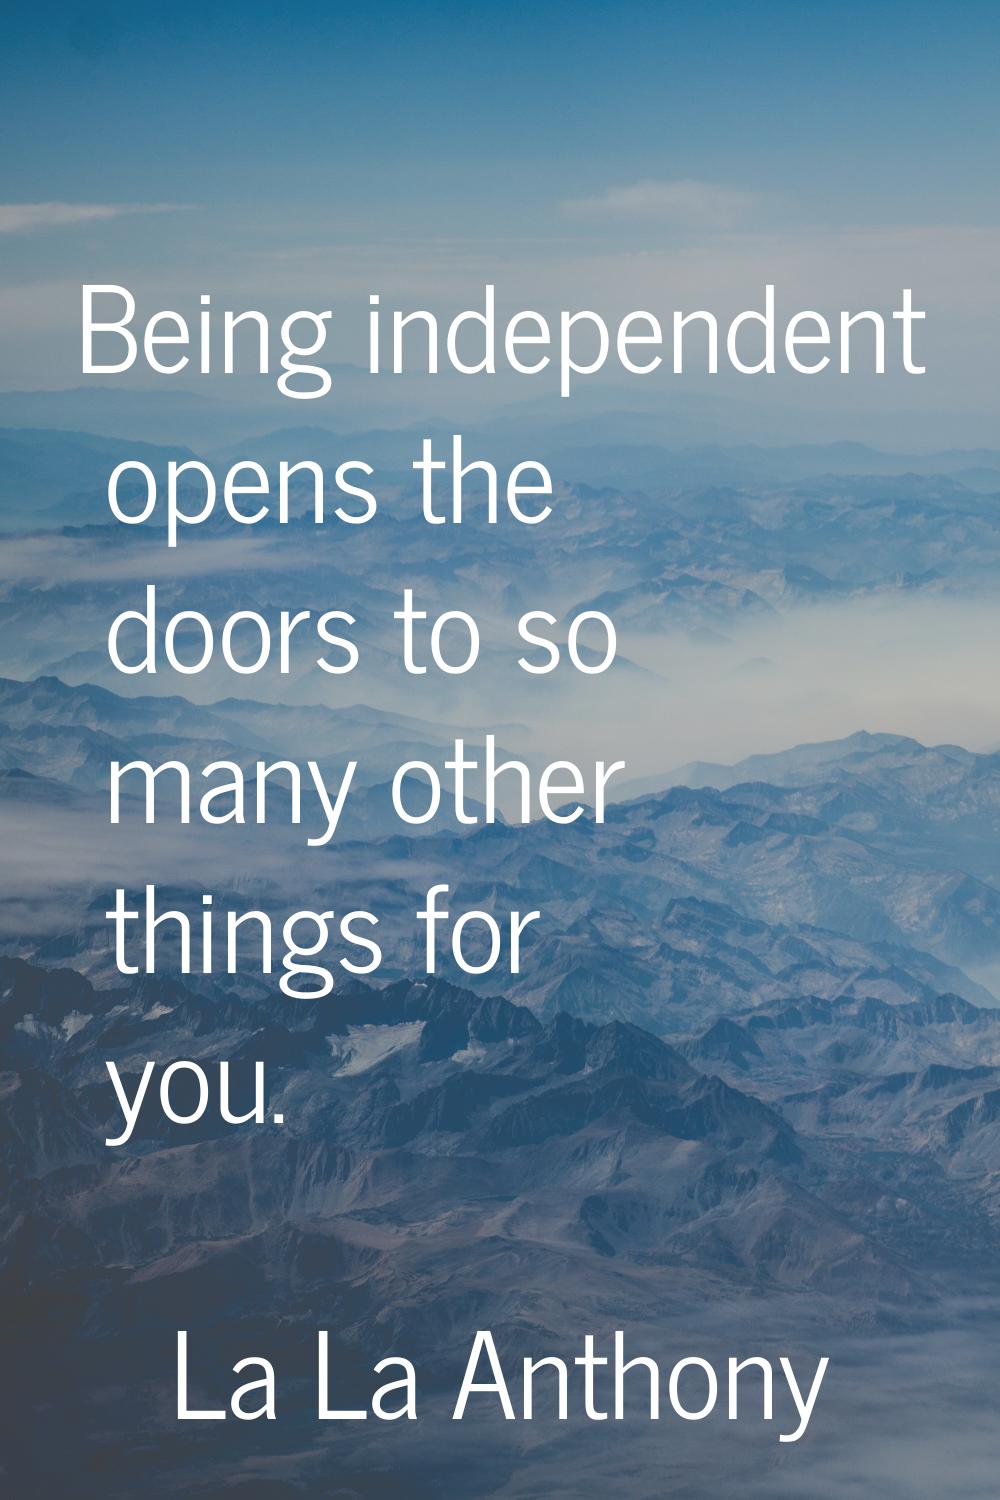 Being independent opens the doors to so many other things for you.